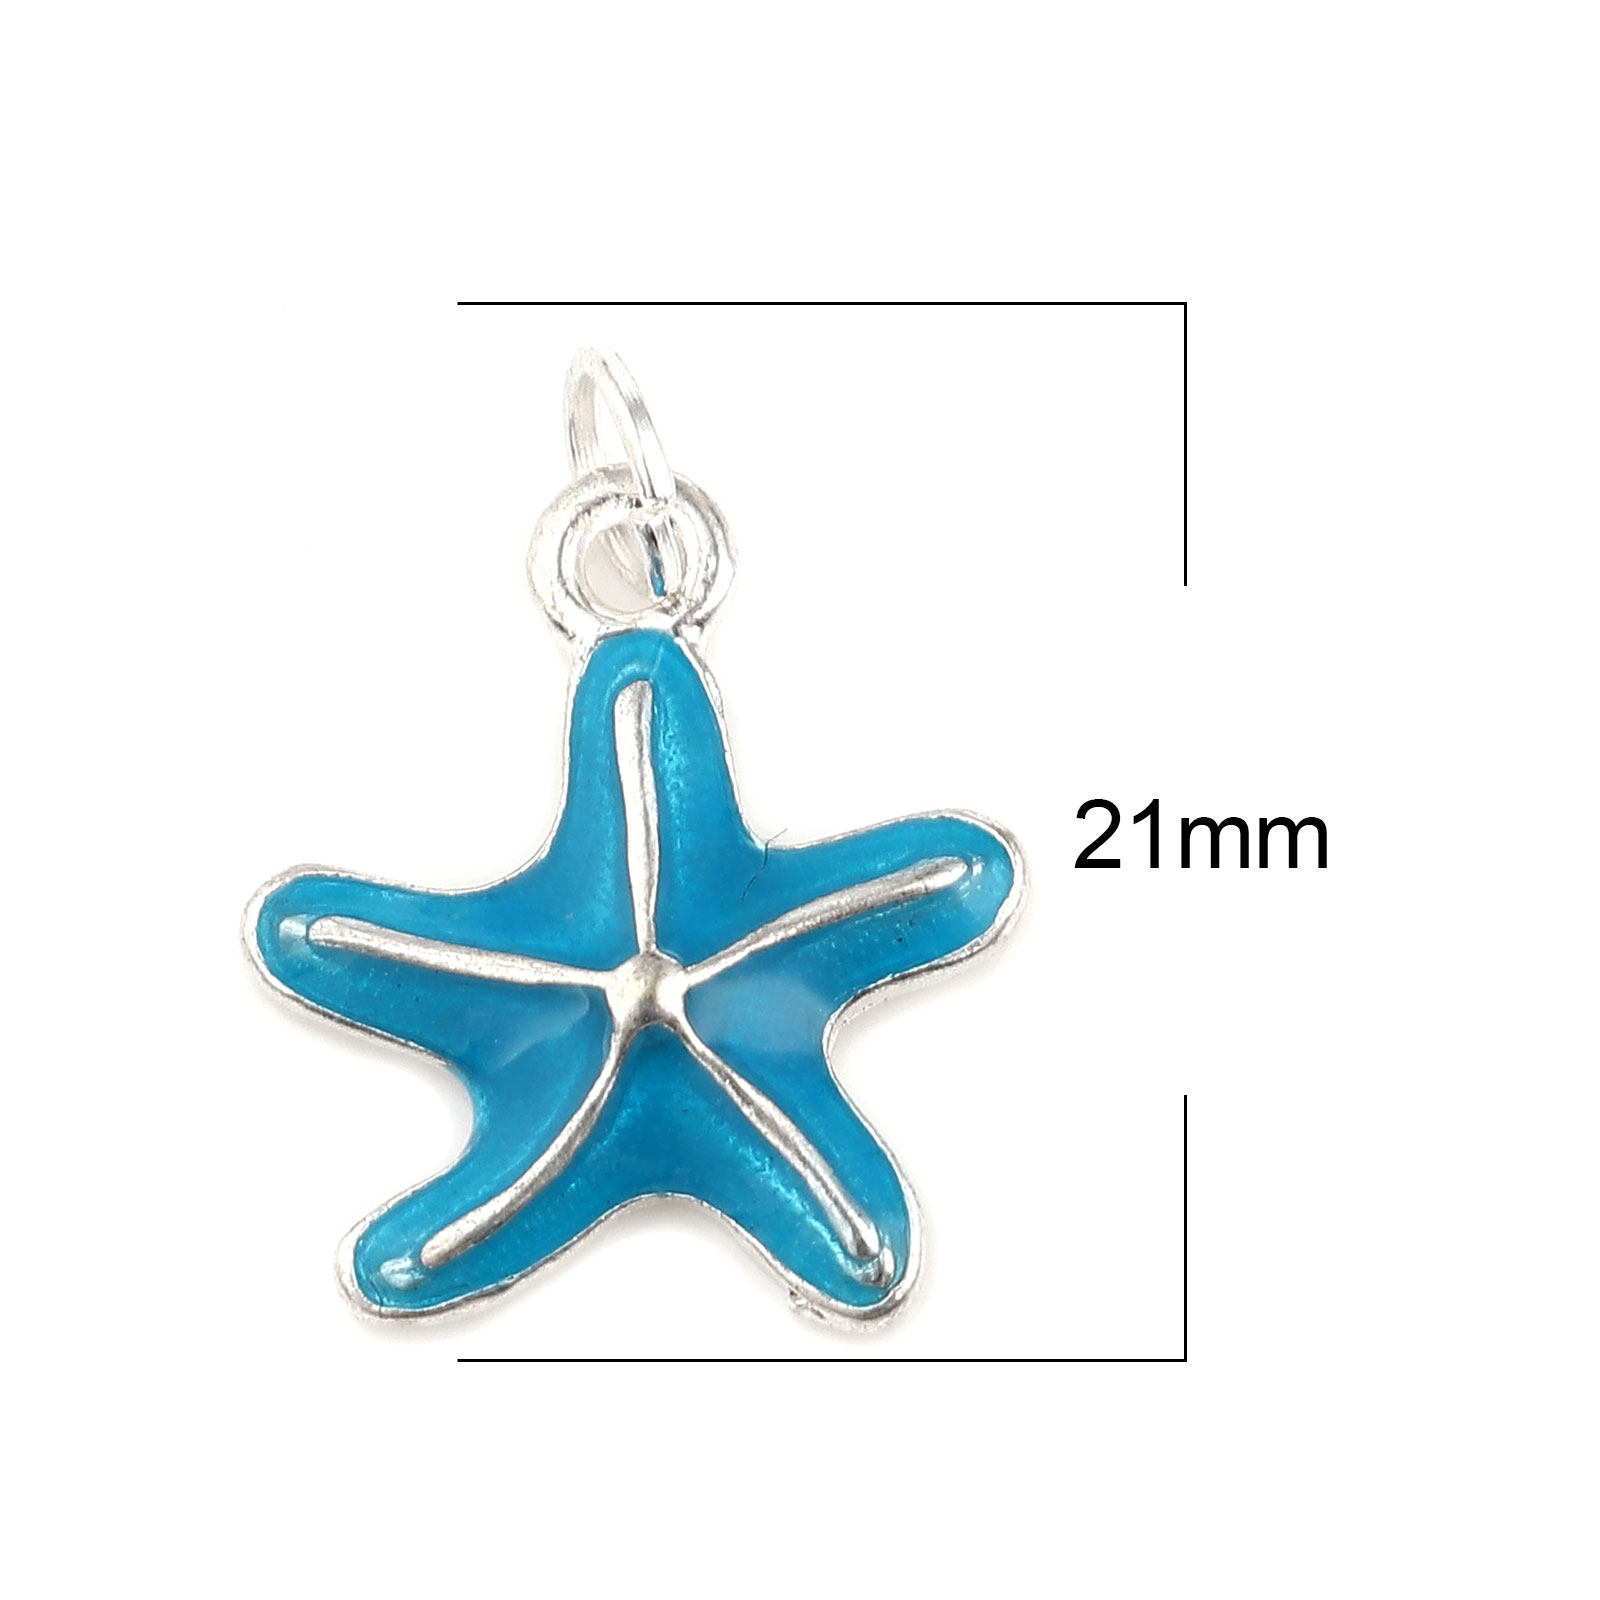 Picture of Zinc Based Alloy Ocean Jewelry Charms Star Fish Silver Plated Blue Enamel 21mm x 16mm, 10 PCs